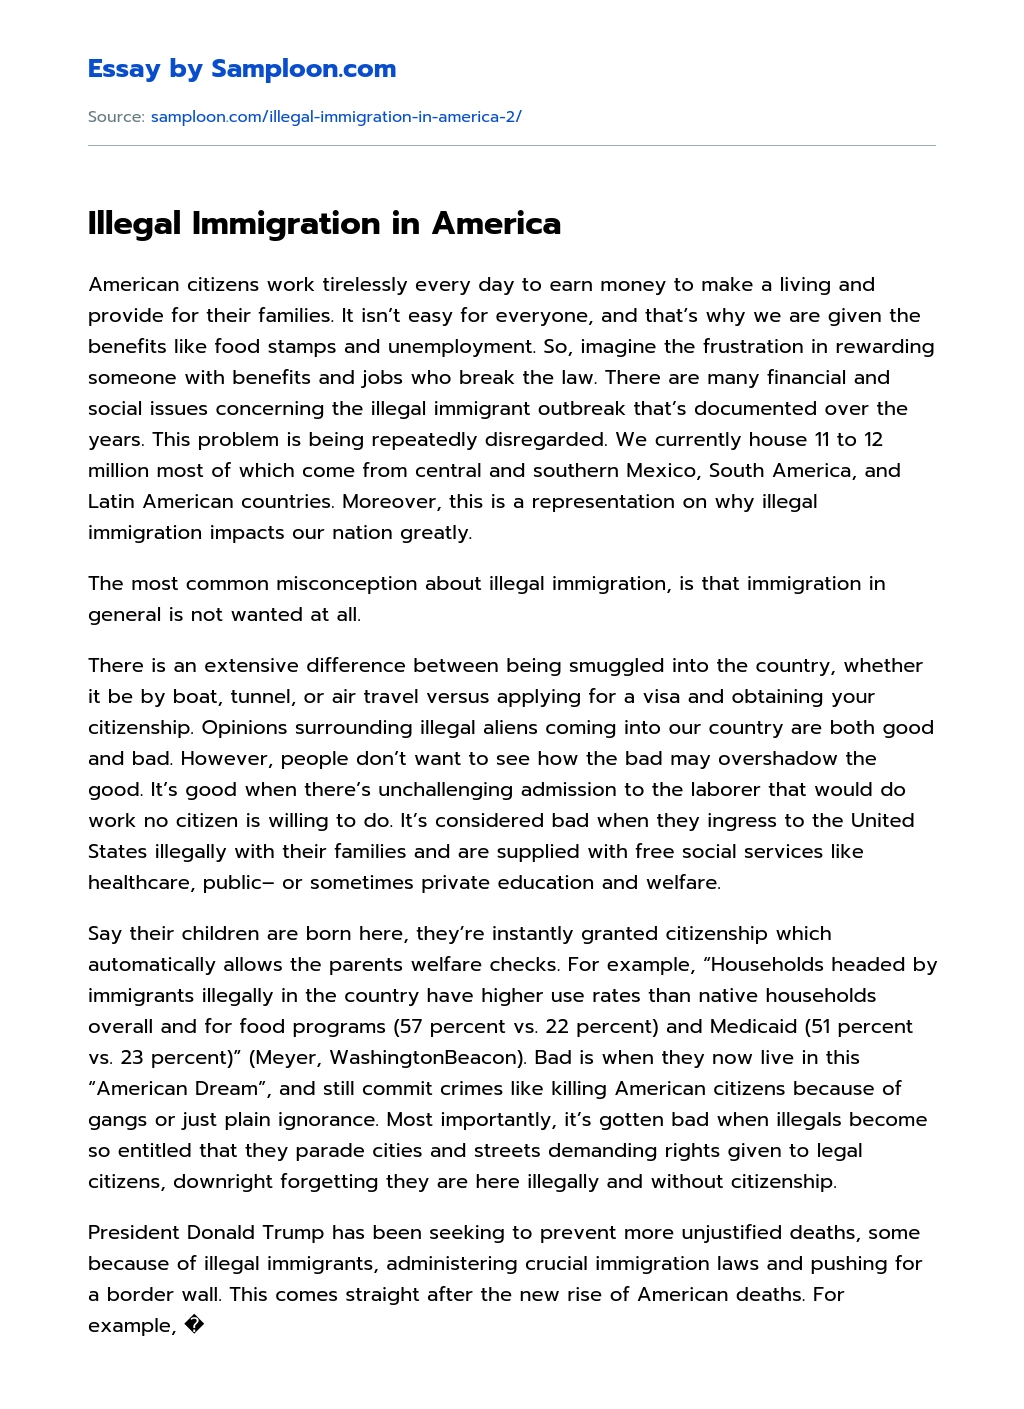 Illegal Immigration As a Problem in America essay